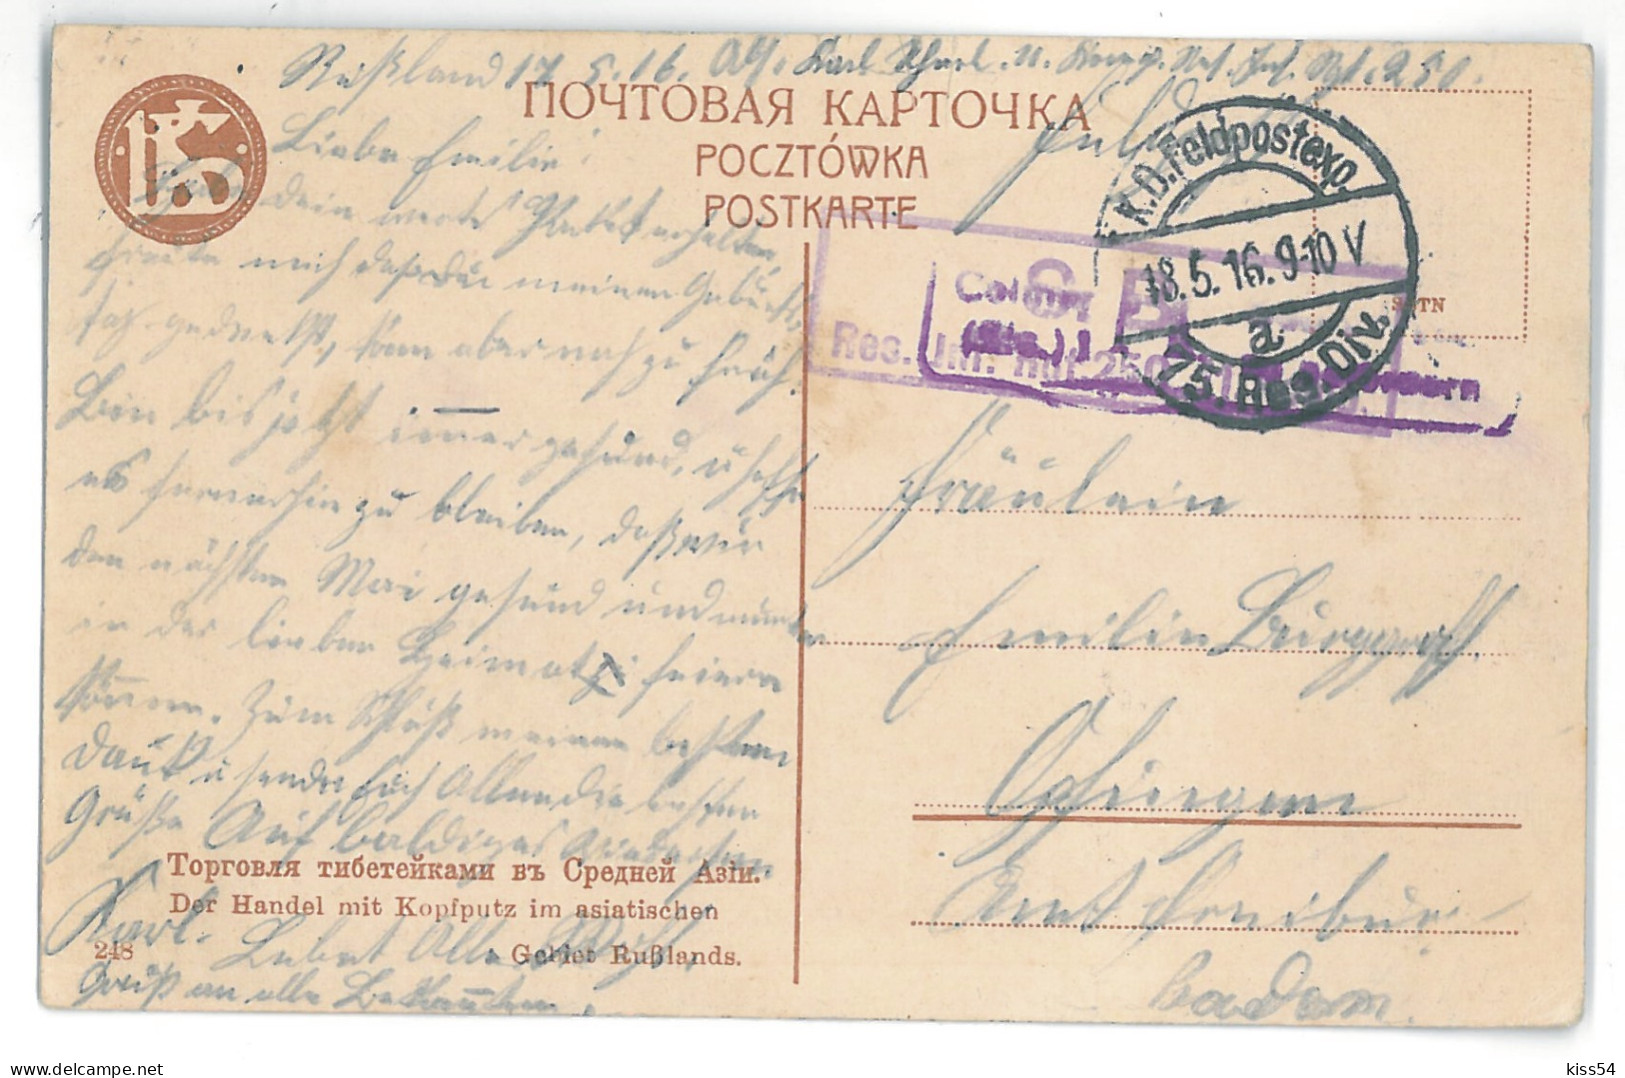 RUS 97 - 15204 ETHNICS From Central Asia, Russia - Old Postcard, CENSOR - Used - 1916 - Rusland